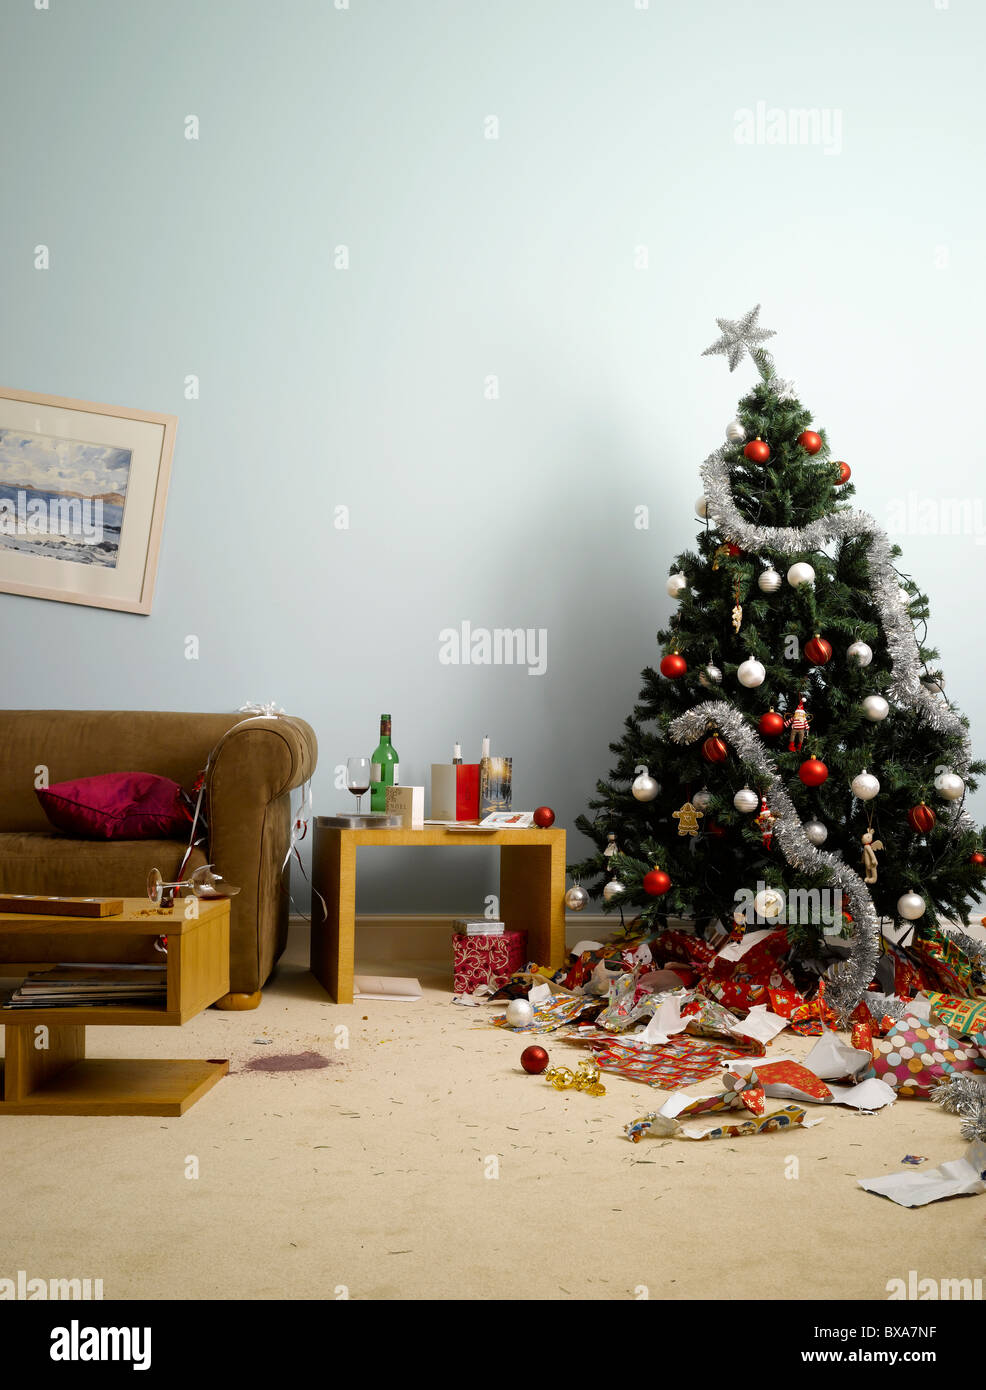 A Christmas living room the night after a wild party Stock Photo